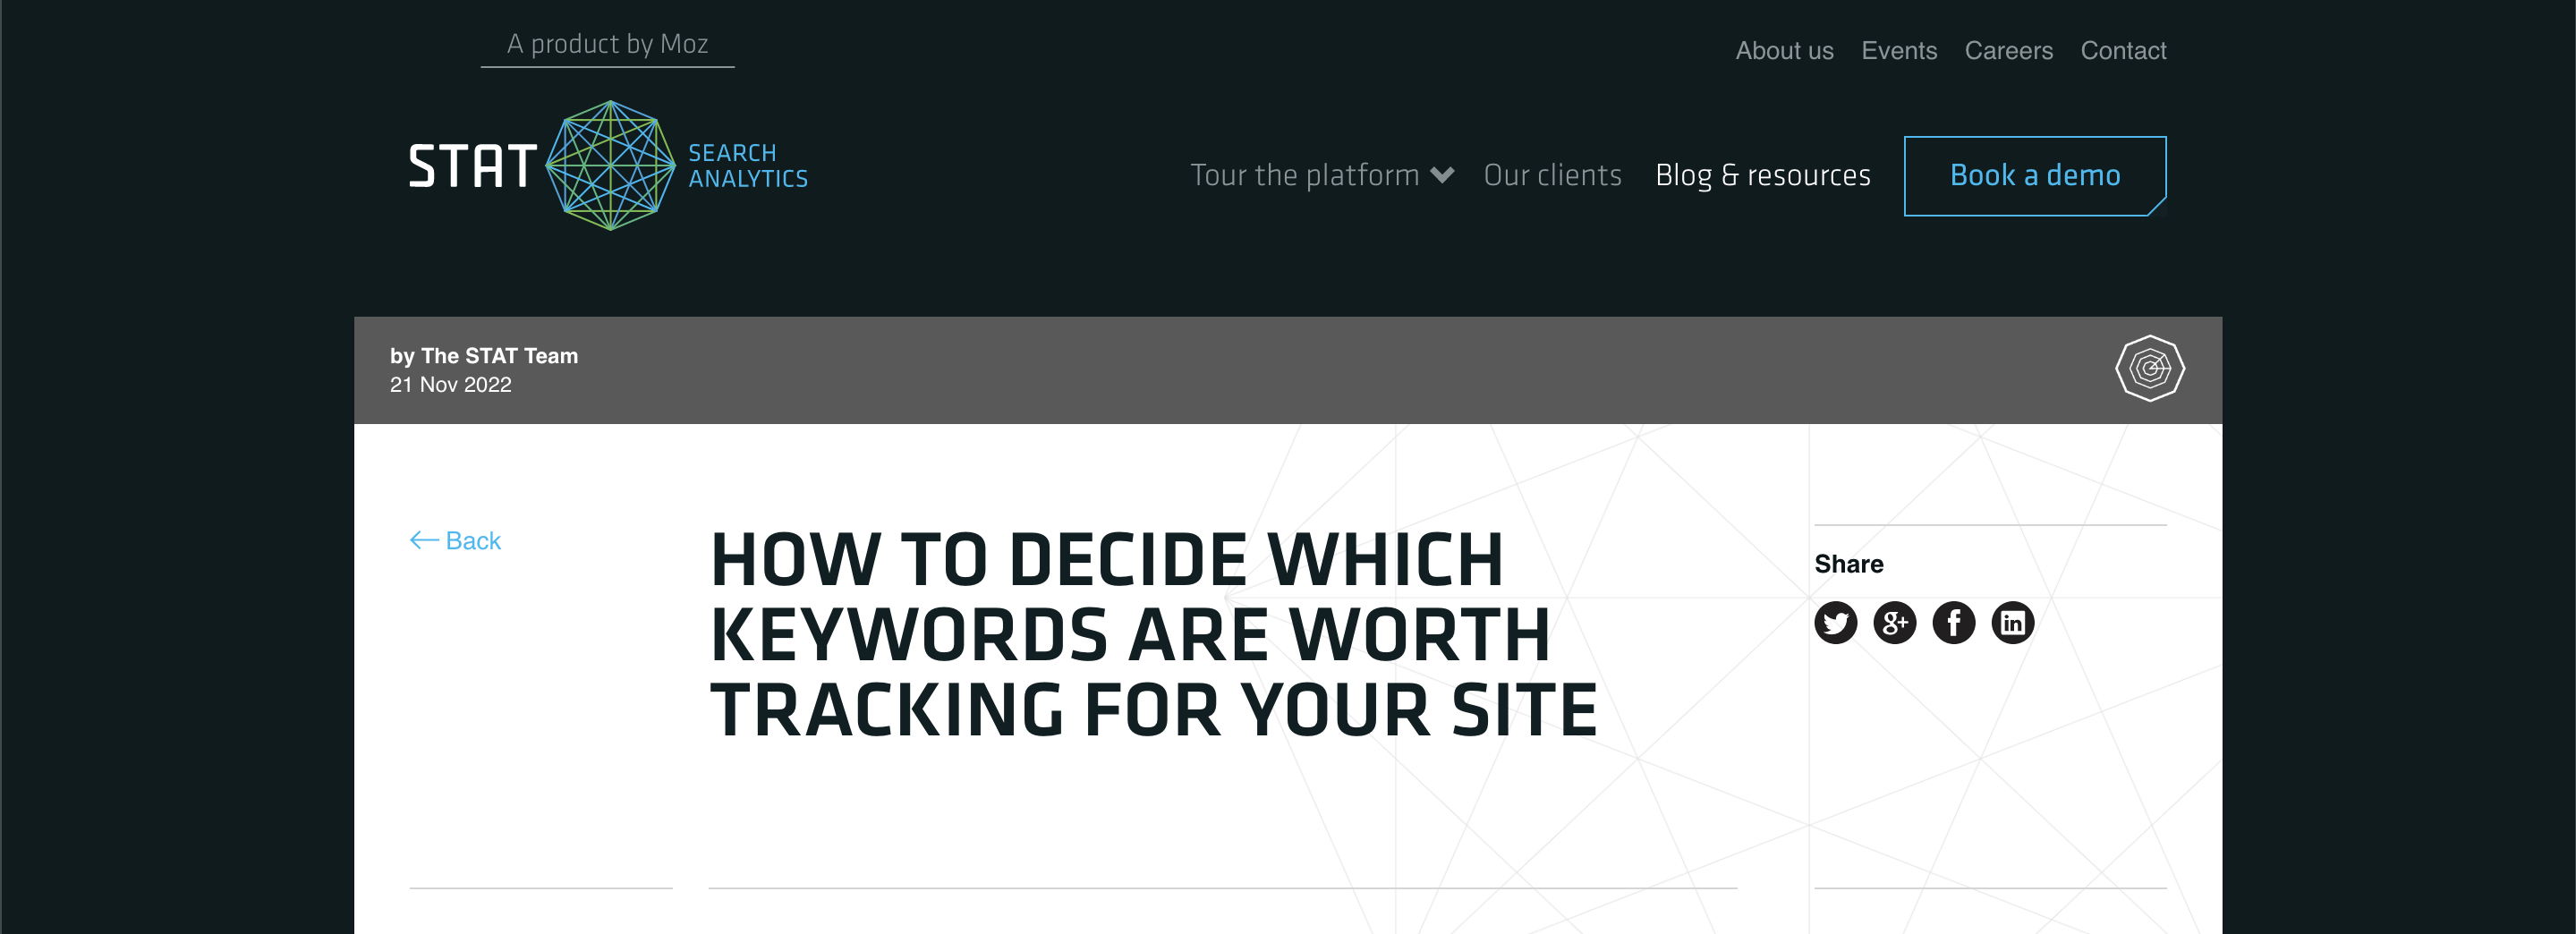 How to Decide Which Keywords are Worth Tracking for Your Site